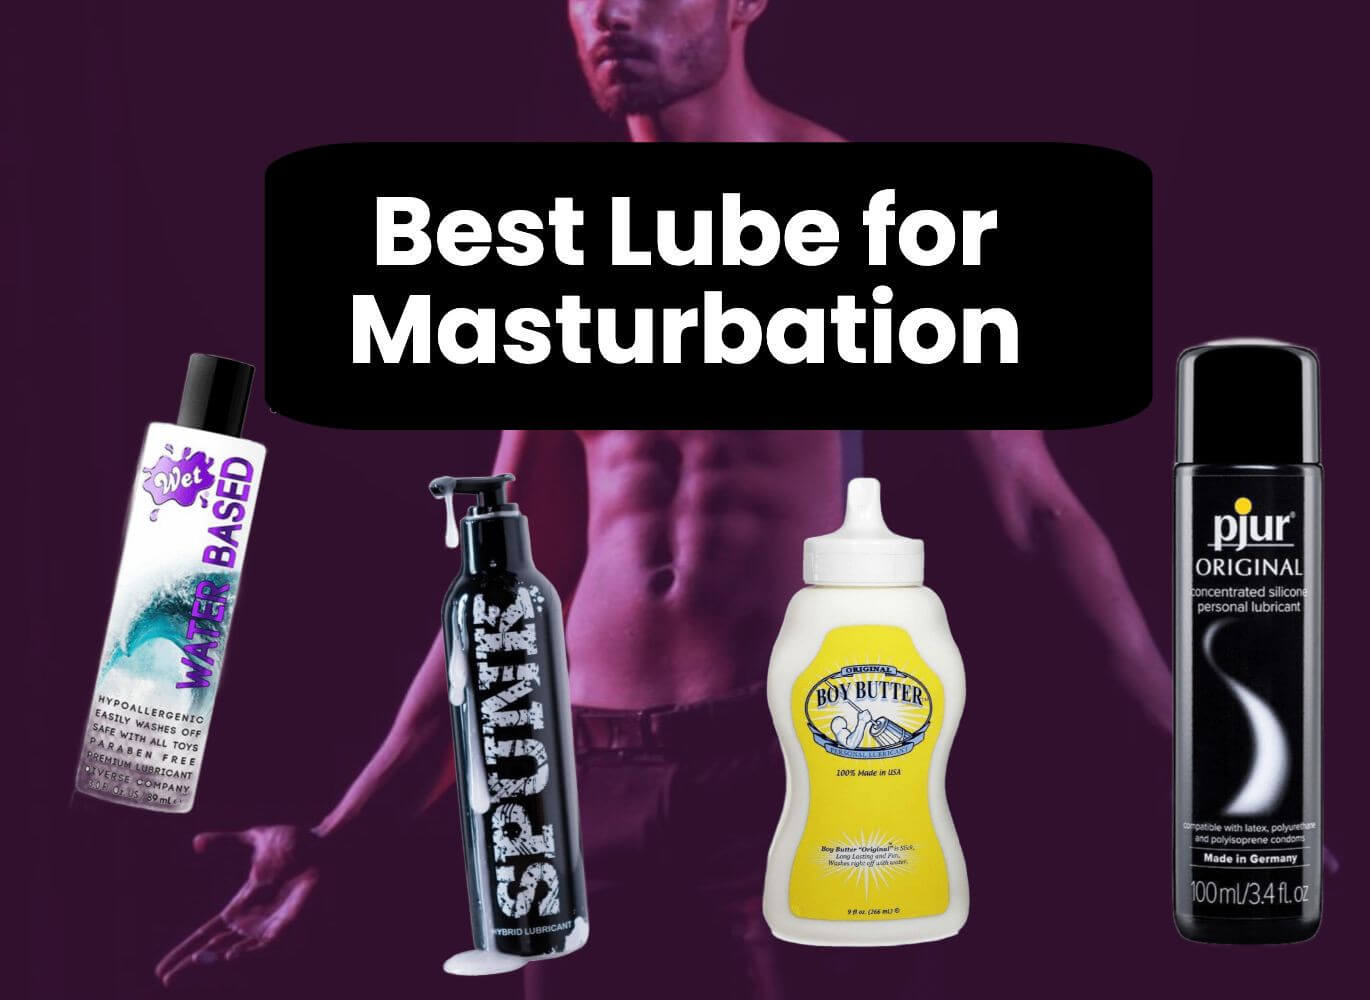 christel lescaut recommends jerking off with lube pic